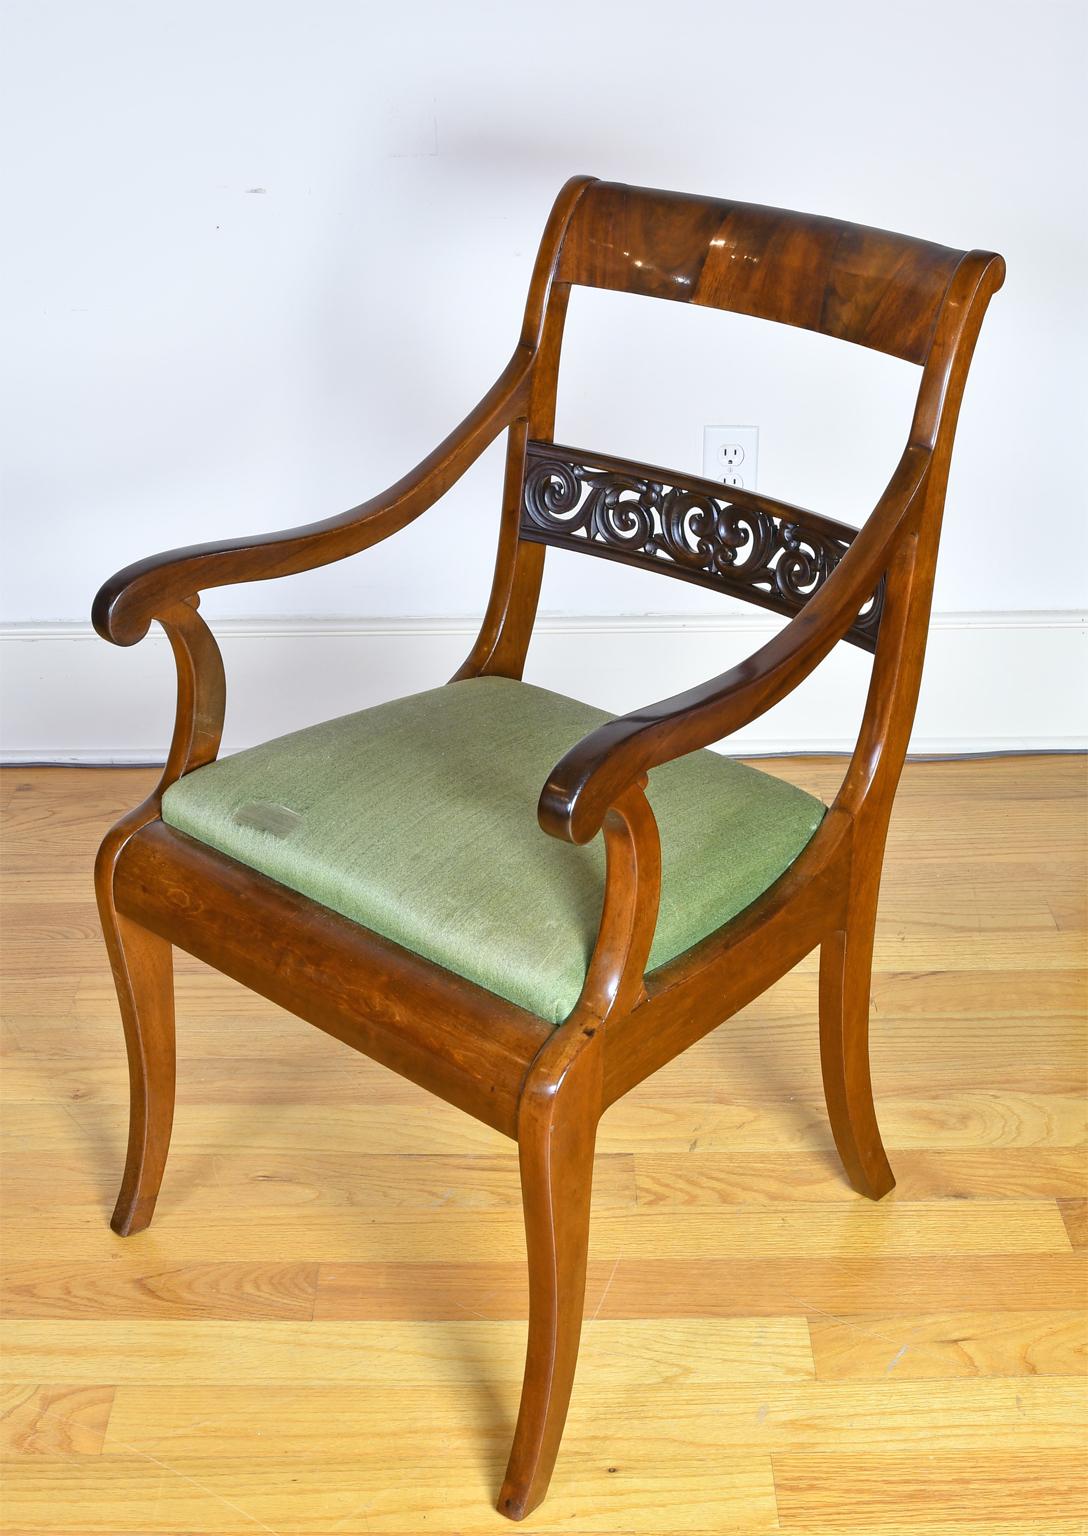 west indies furniture style